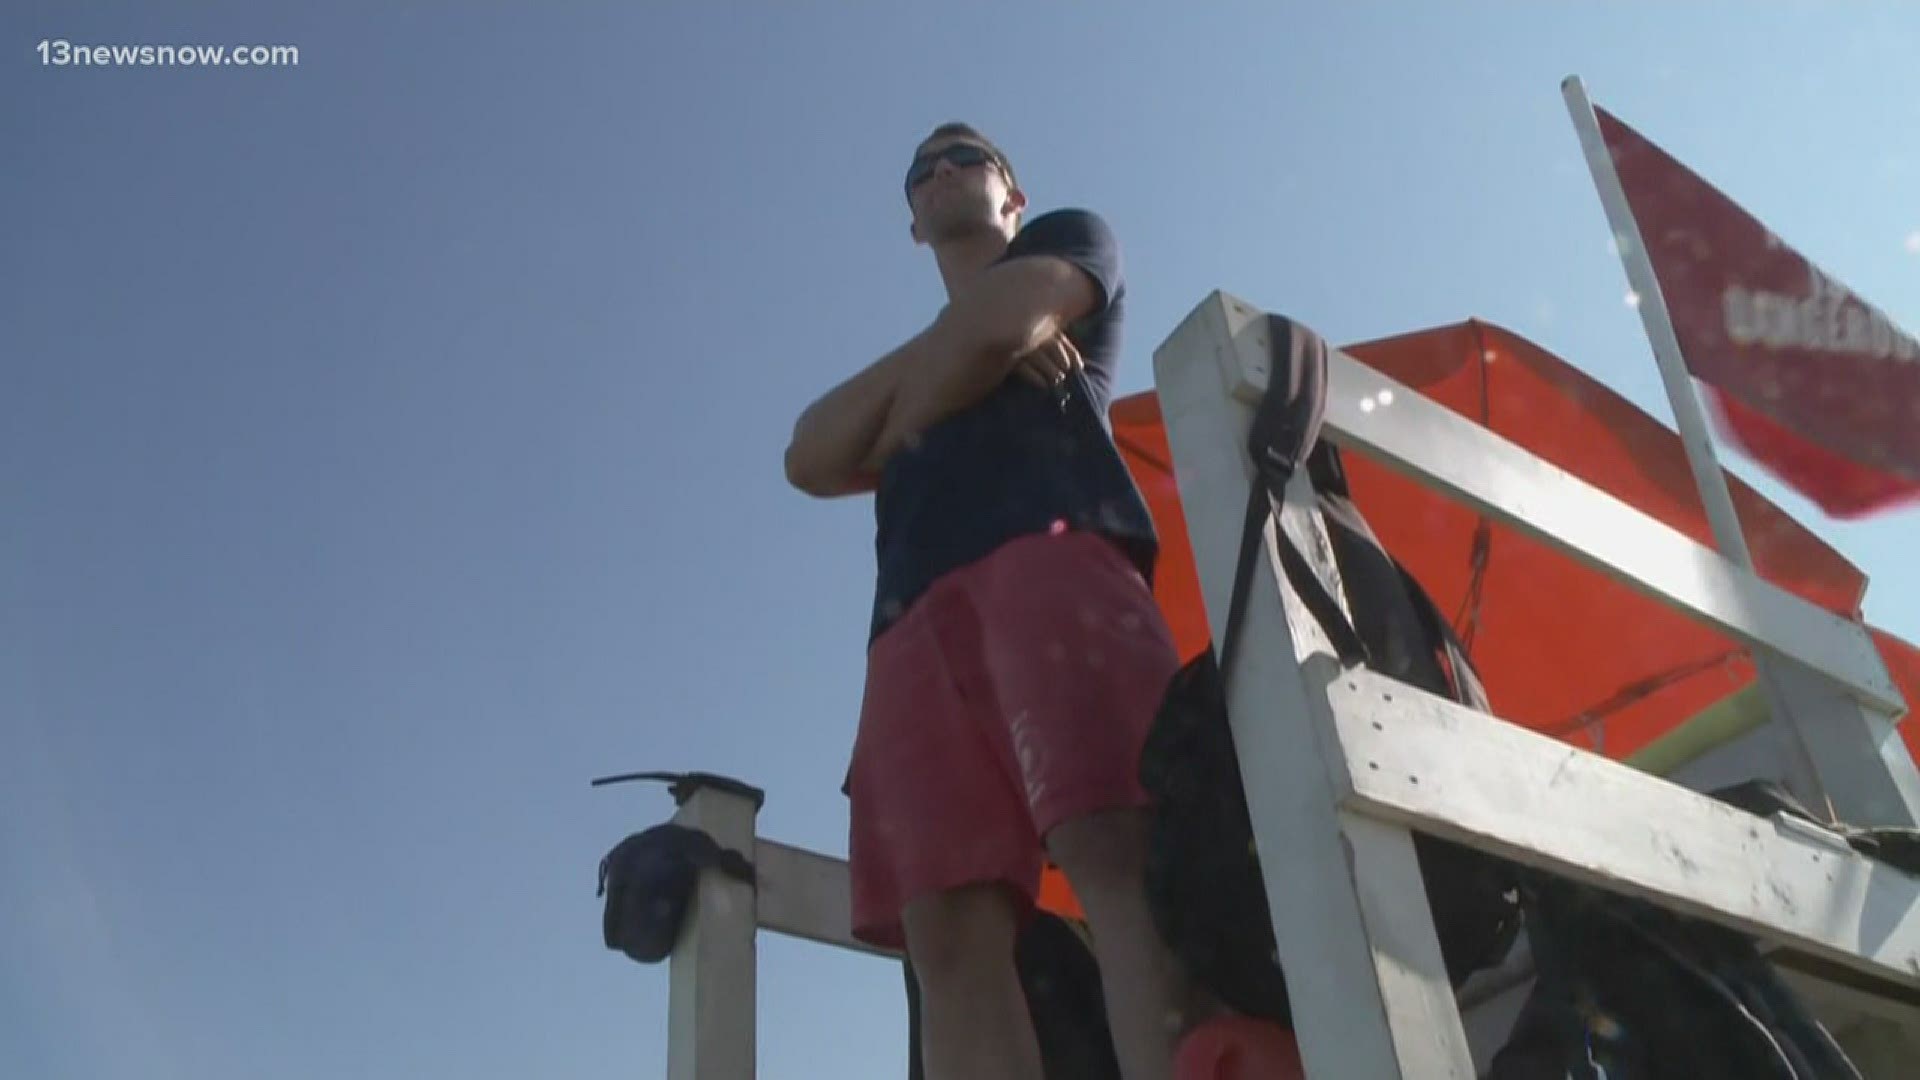 How are Virginia Beach lifeguards preparing for crowds, during this pandemic? We got answers.